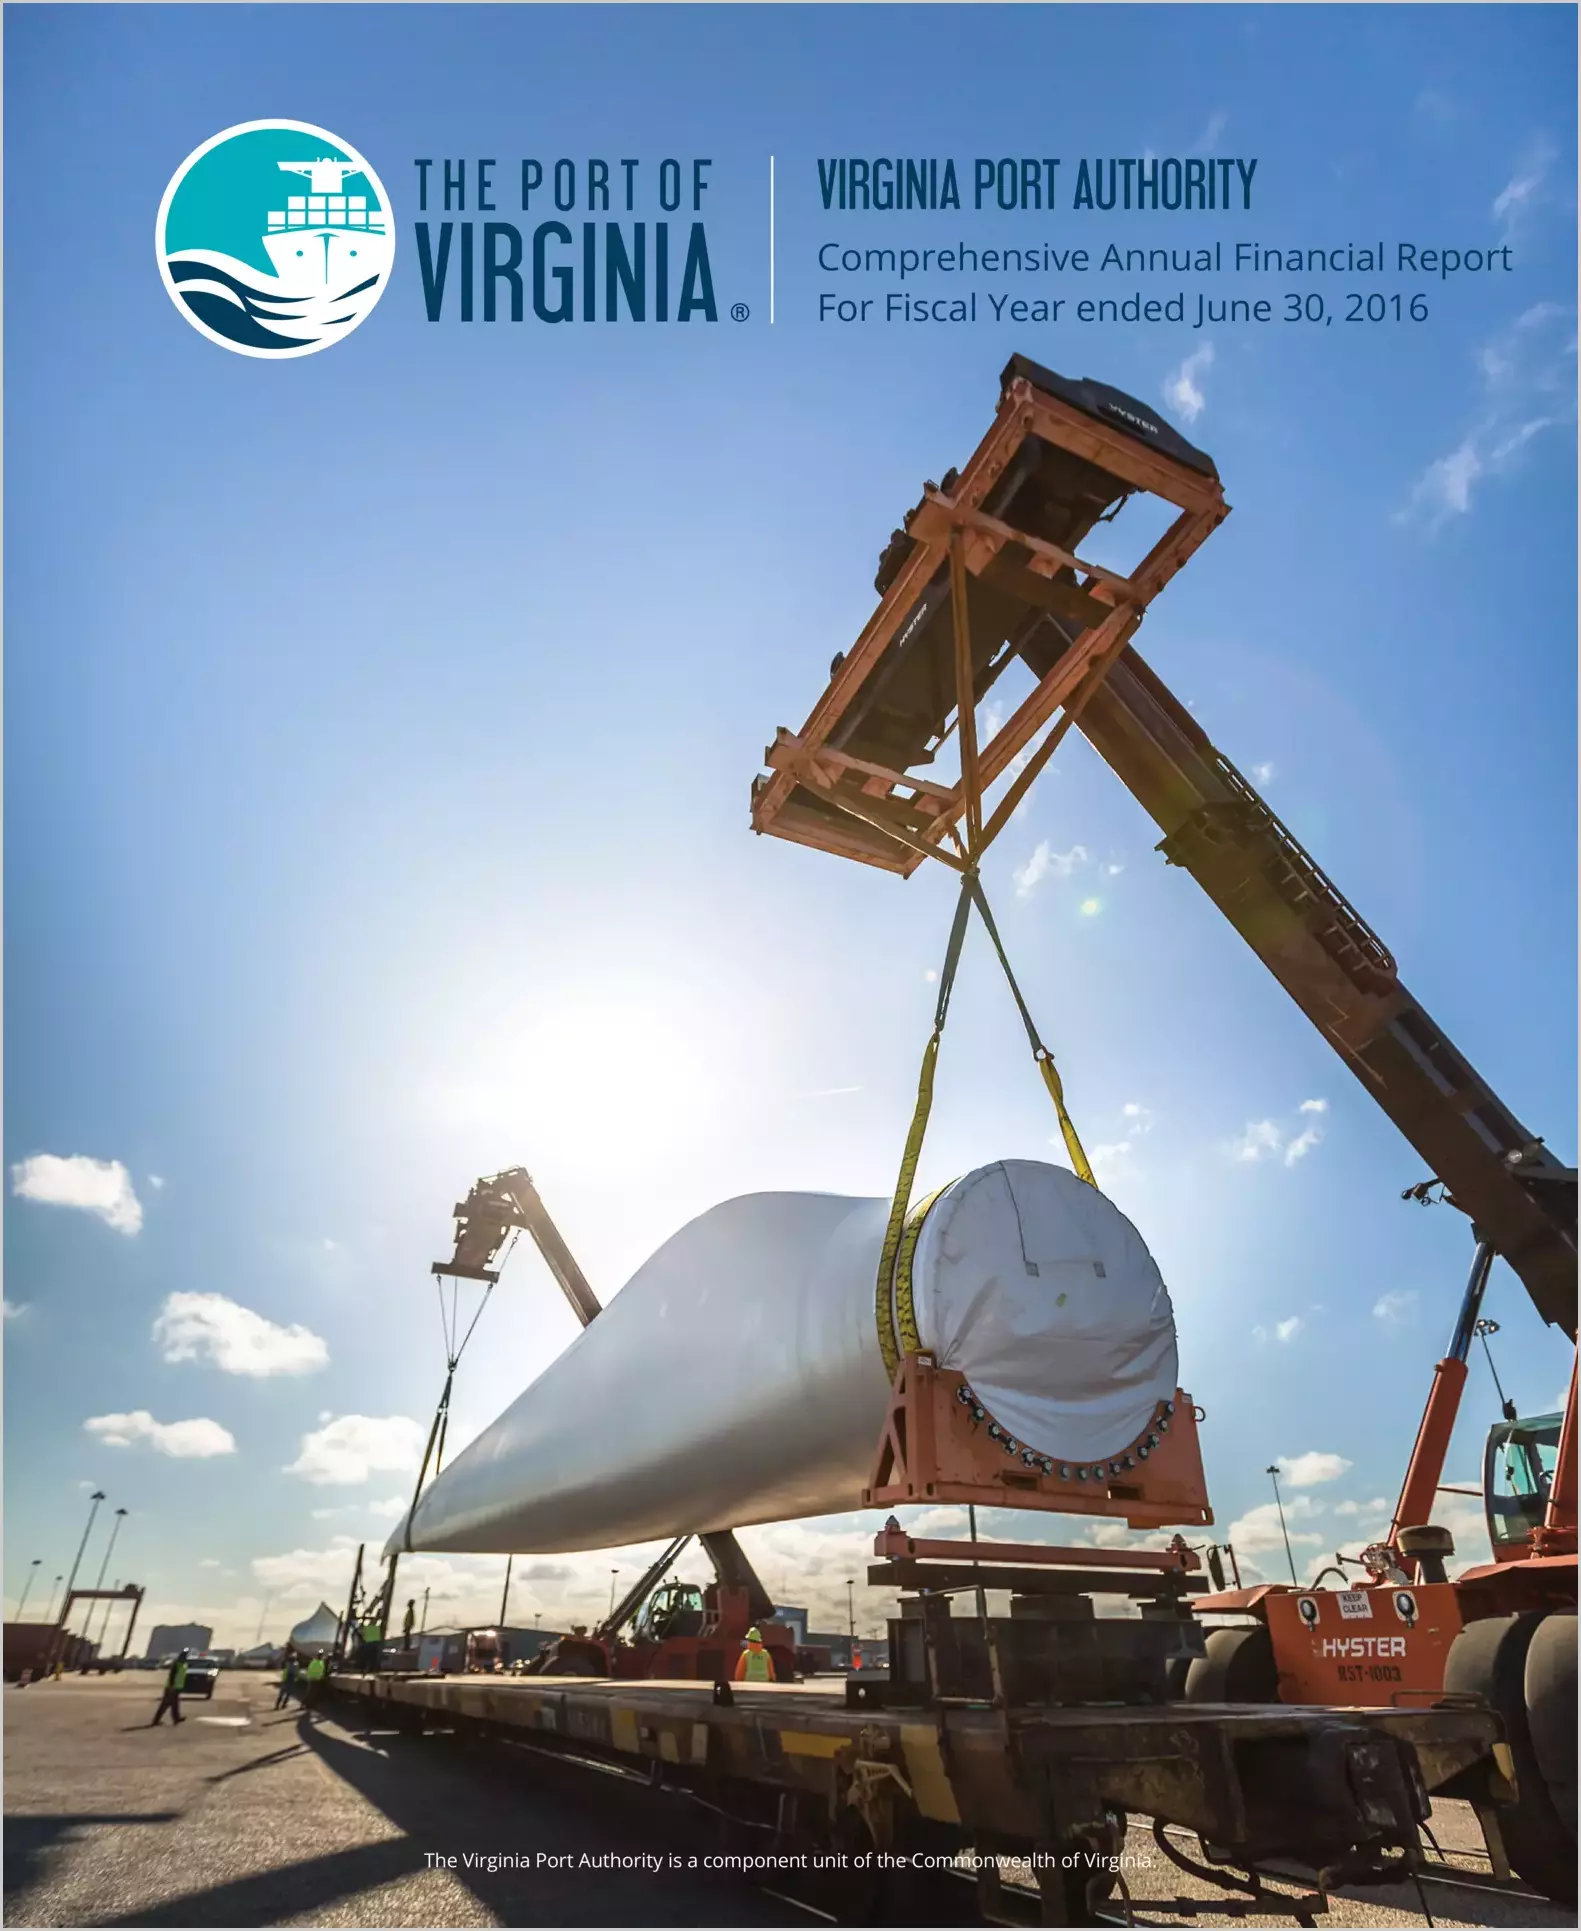 Virginia Port Authority Financial Statements for the year ended June 30, 2016